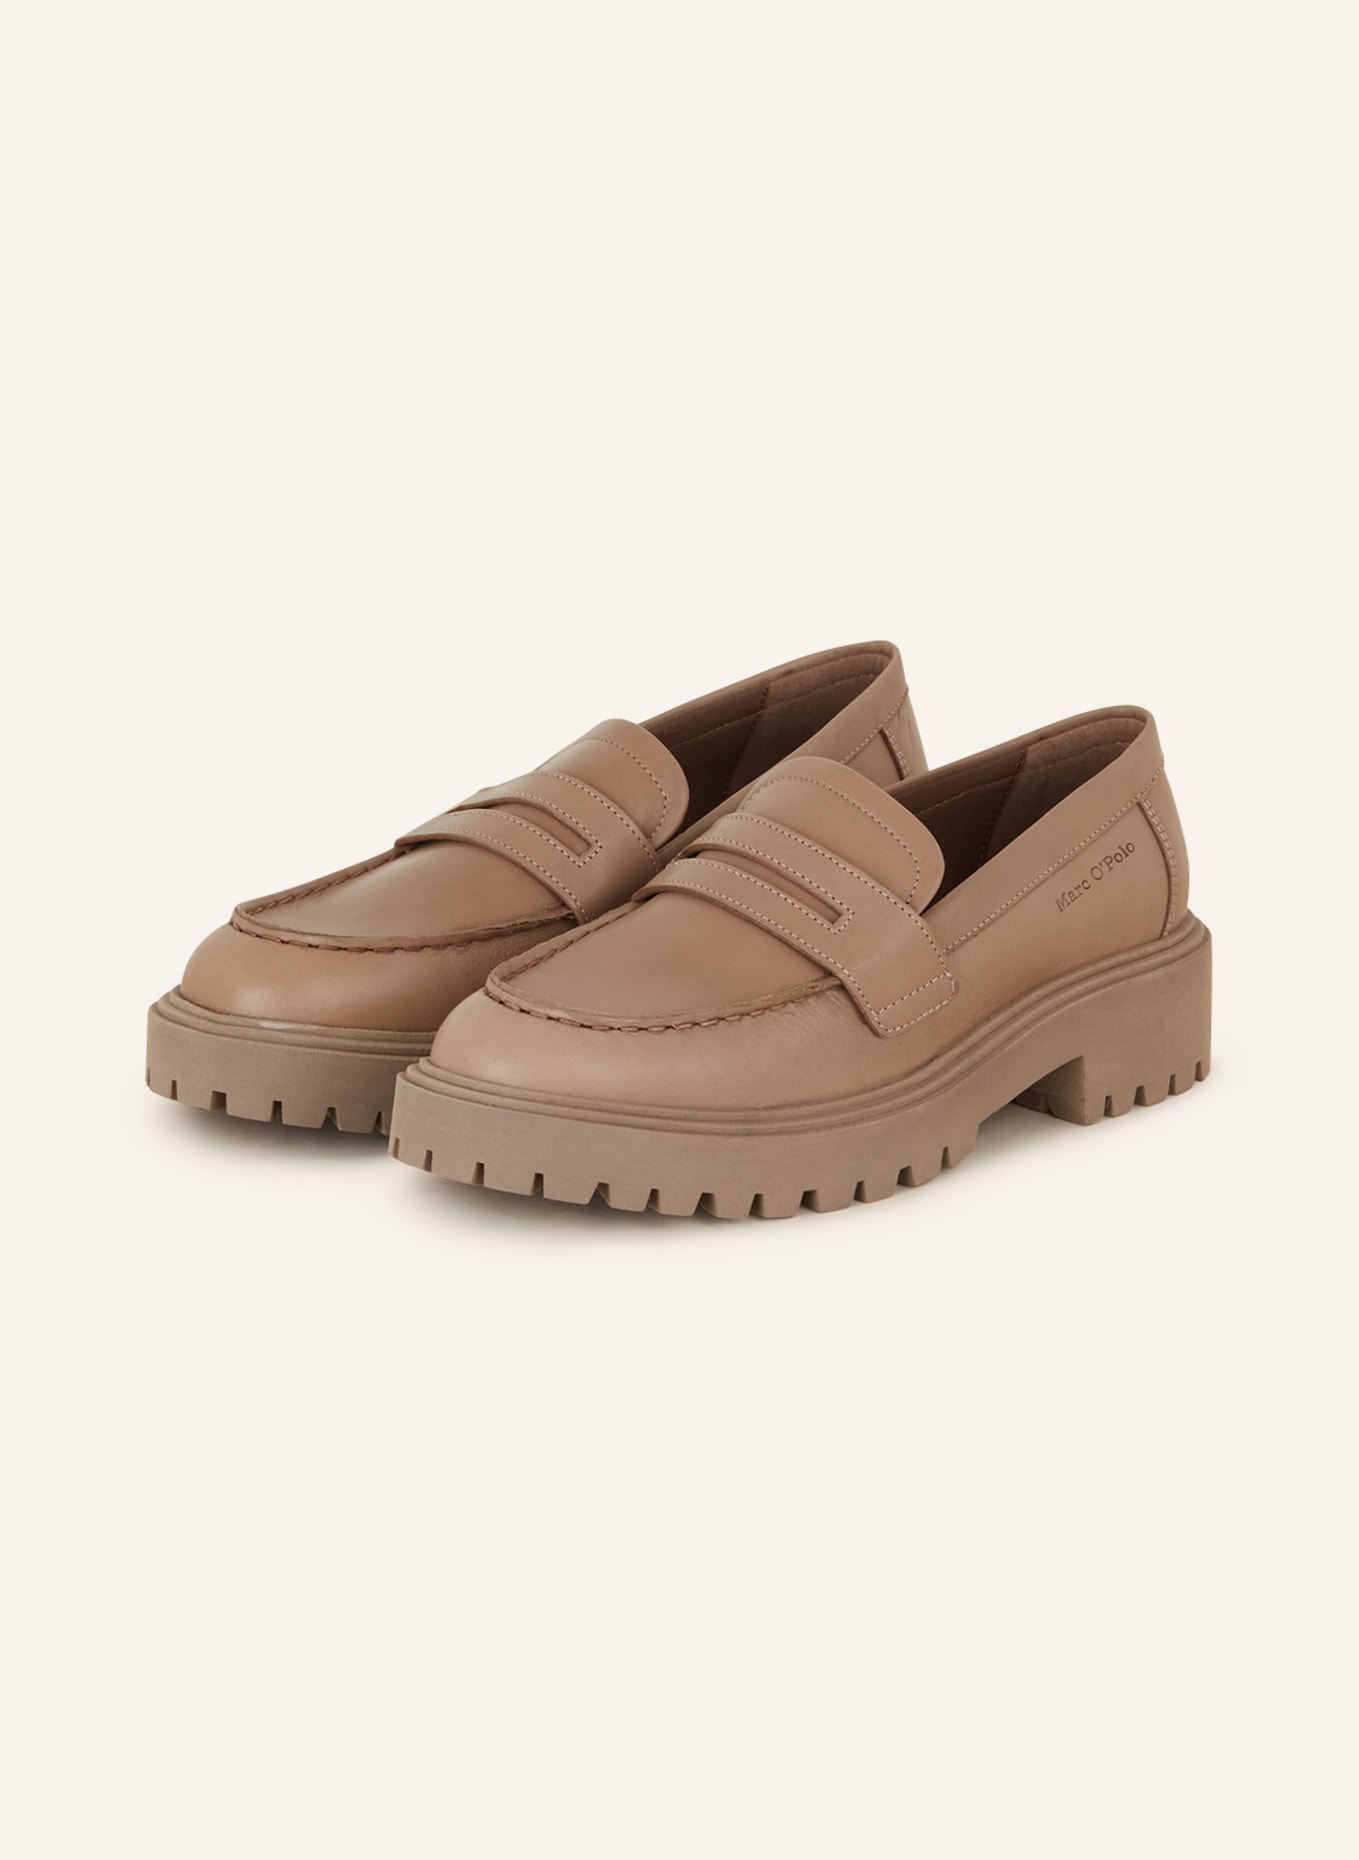 Marc O'Polo Penny-Loafer, Farbe: TAUPE (Bild 1)